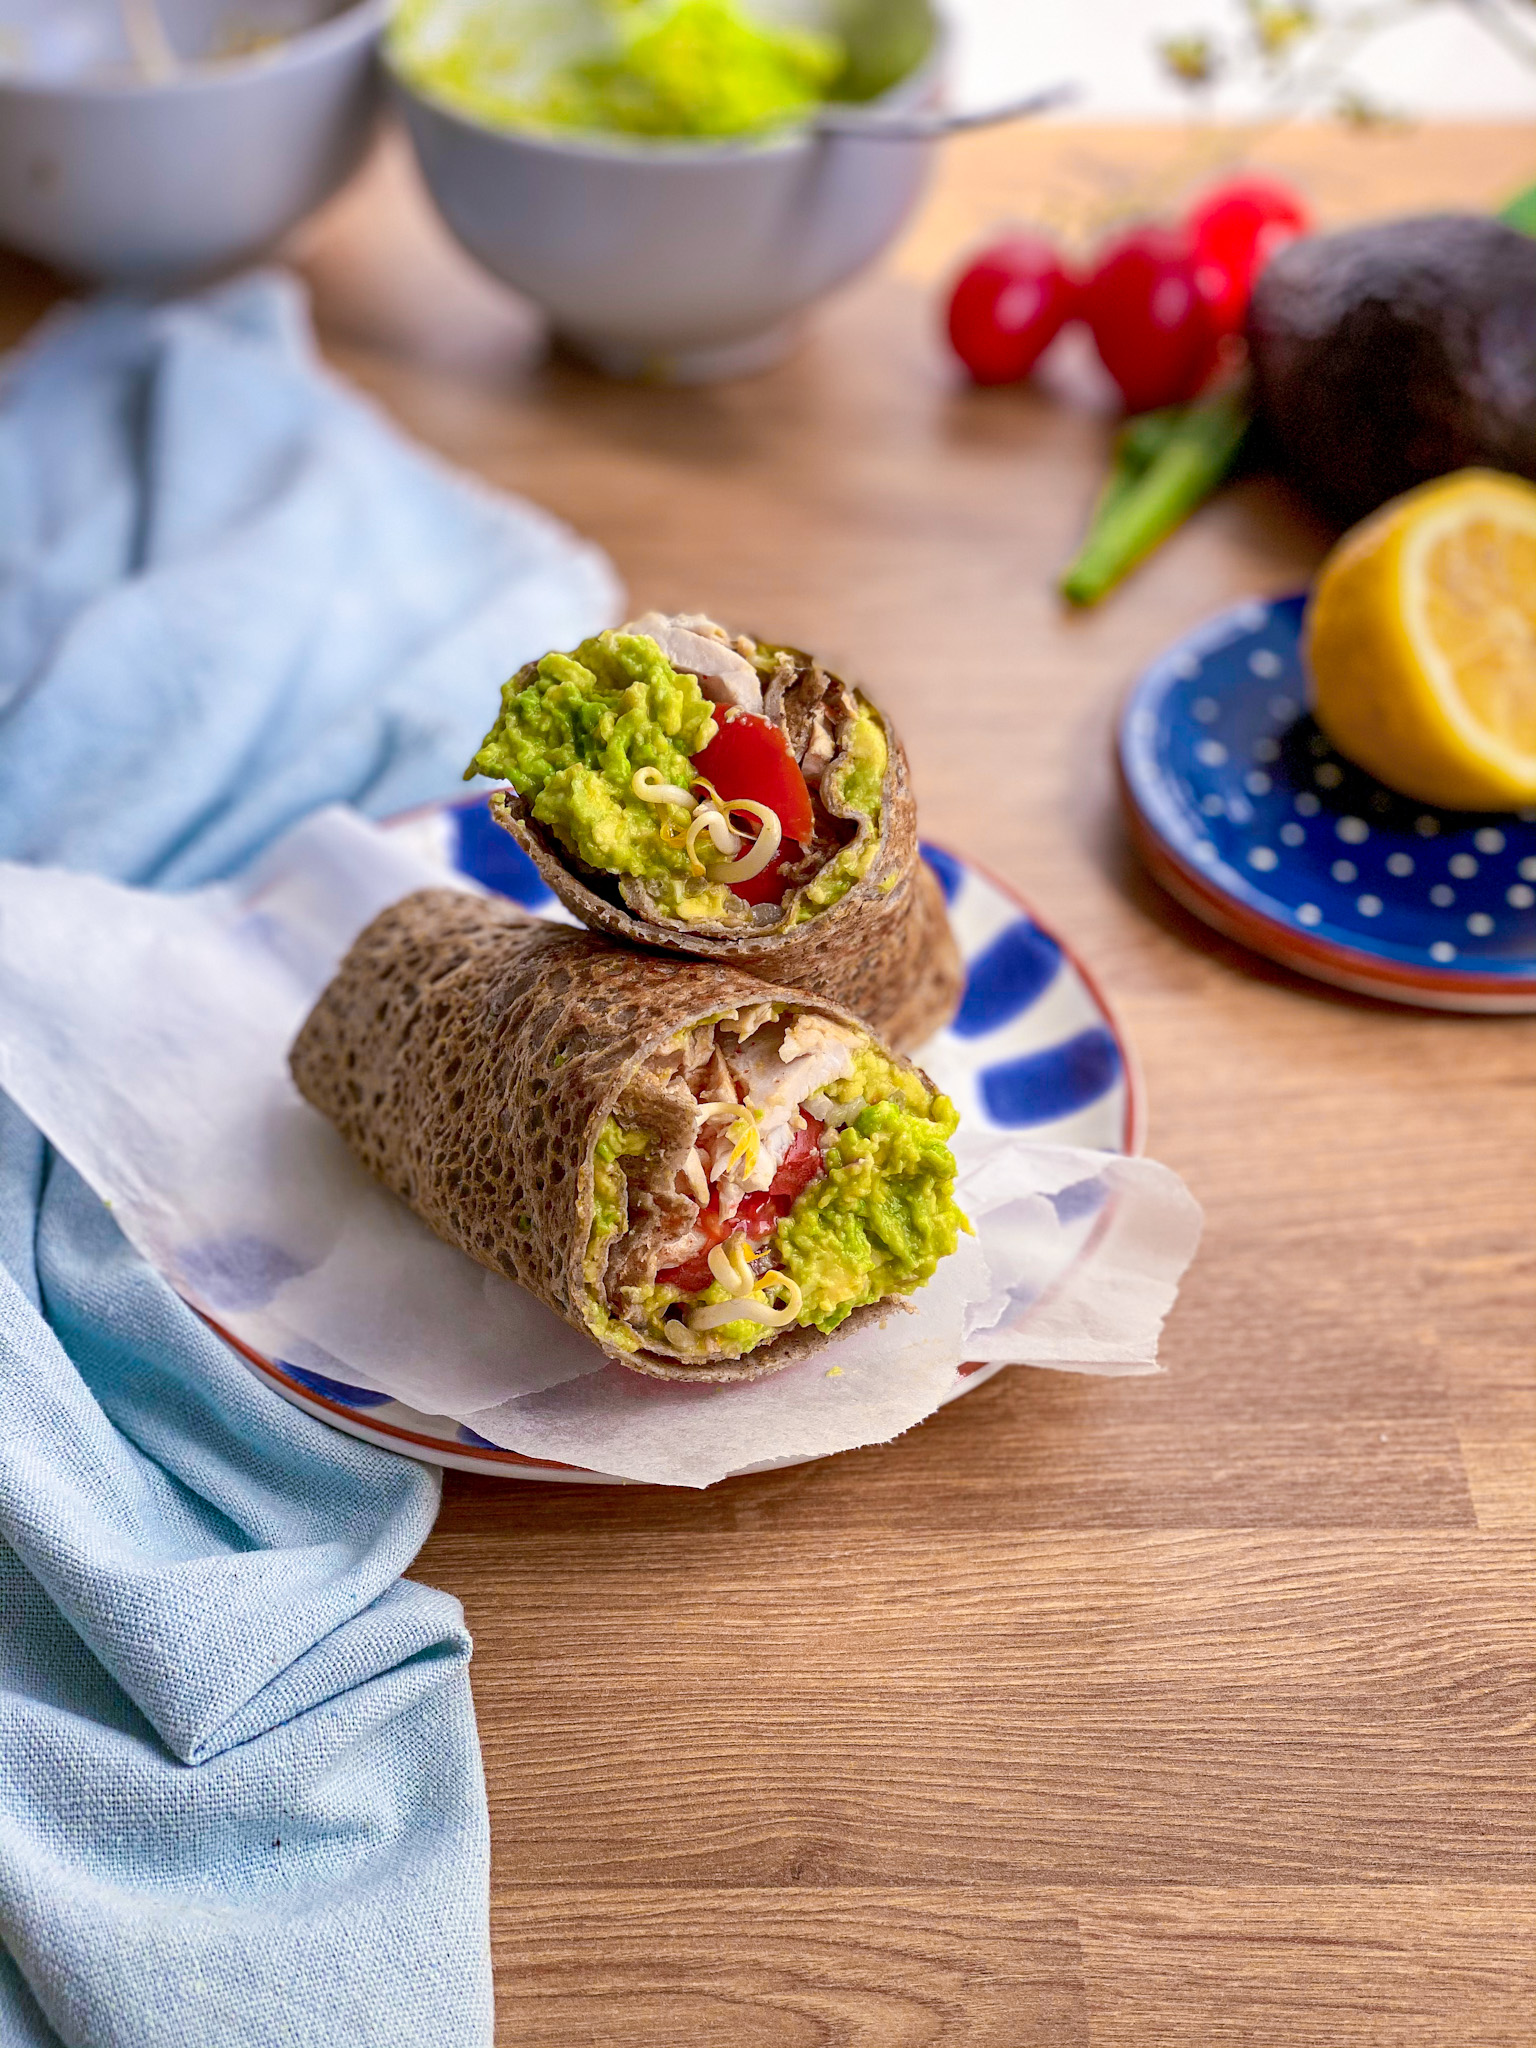 Buckwheat wrap filled with veggies on a plate